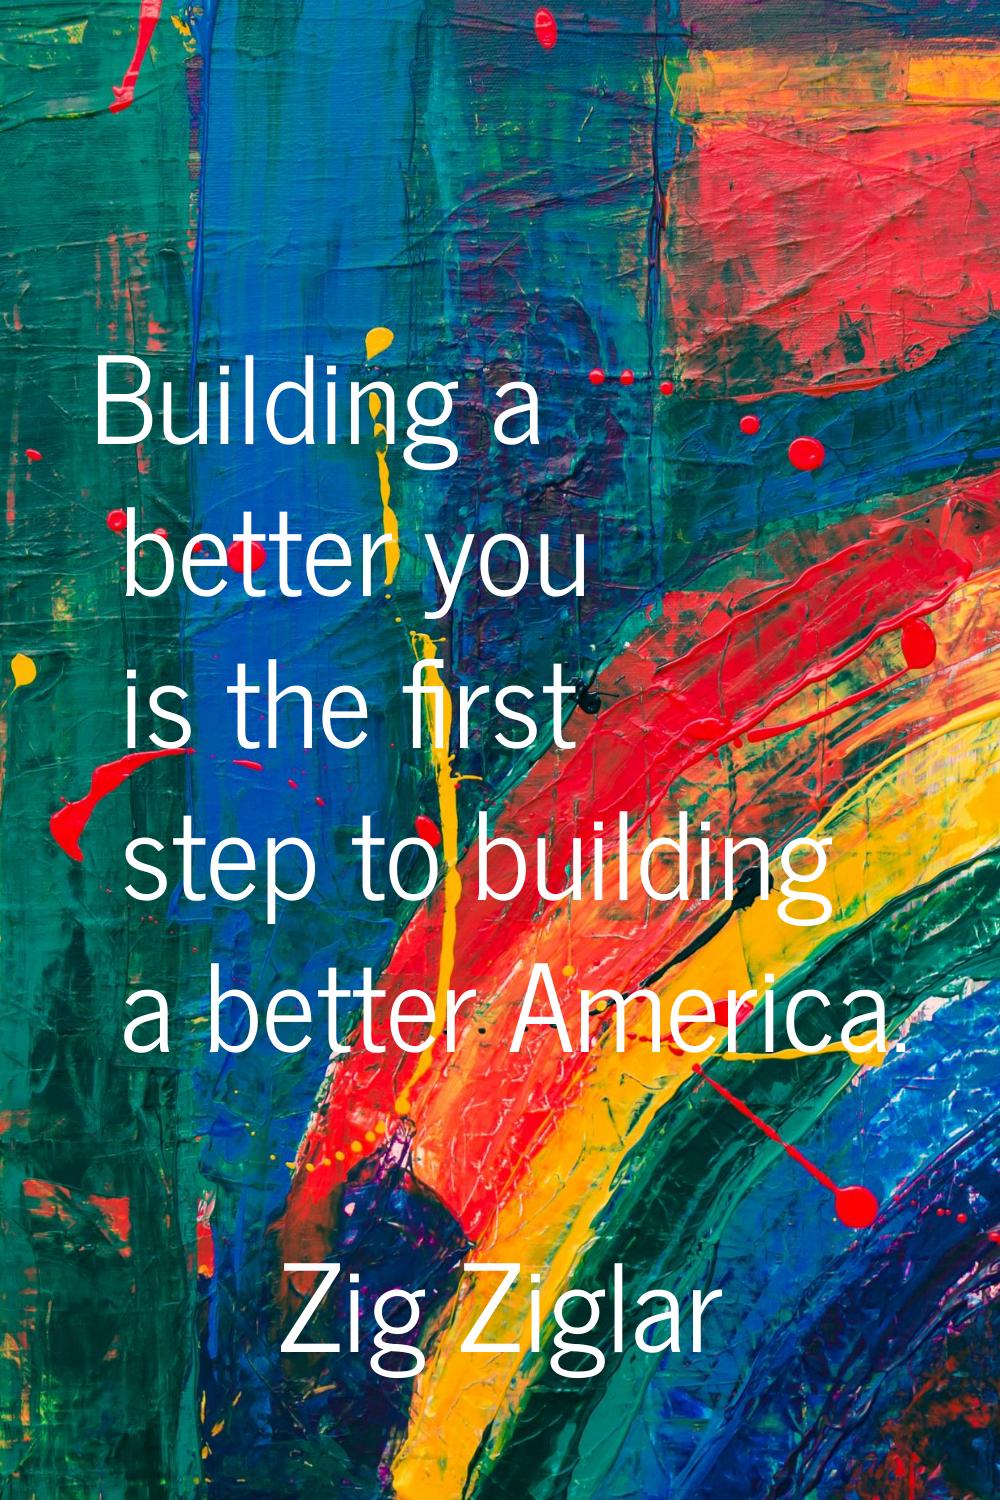 Building a better you is the first step to building a better America.